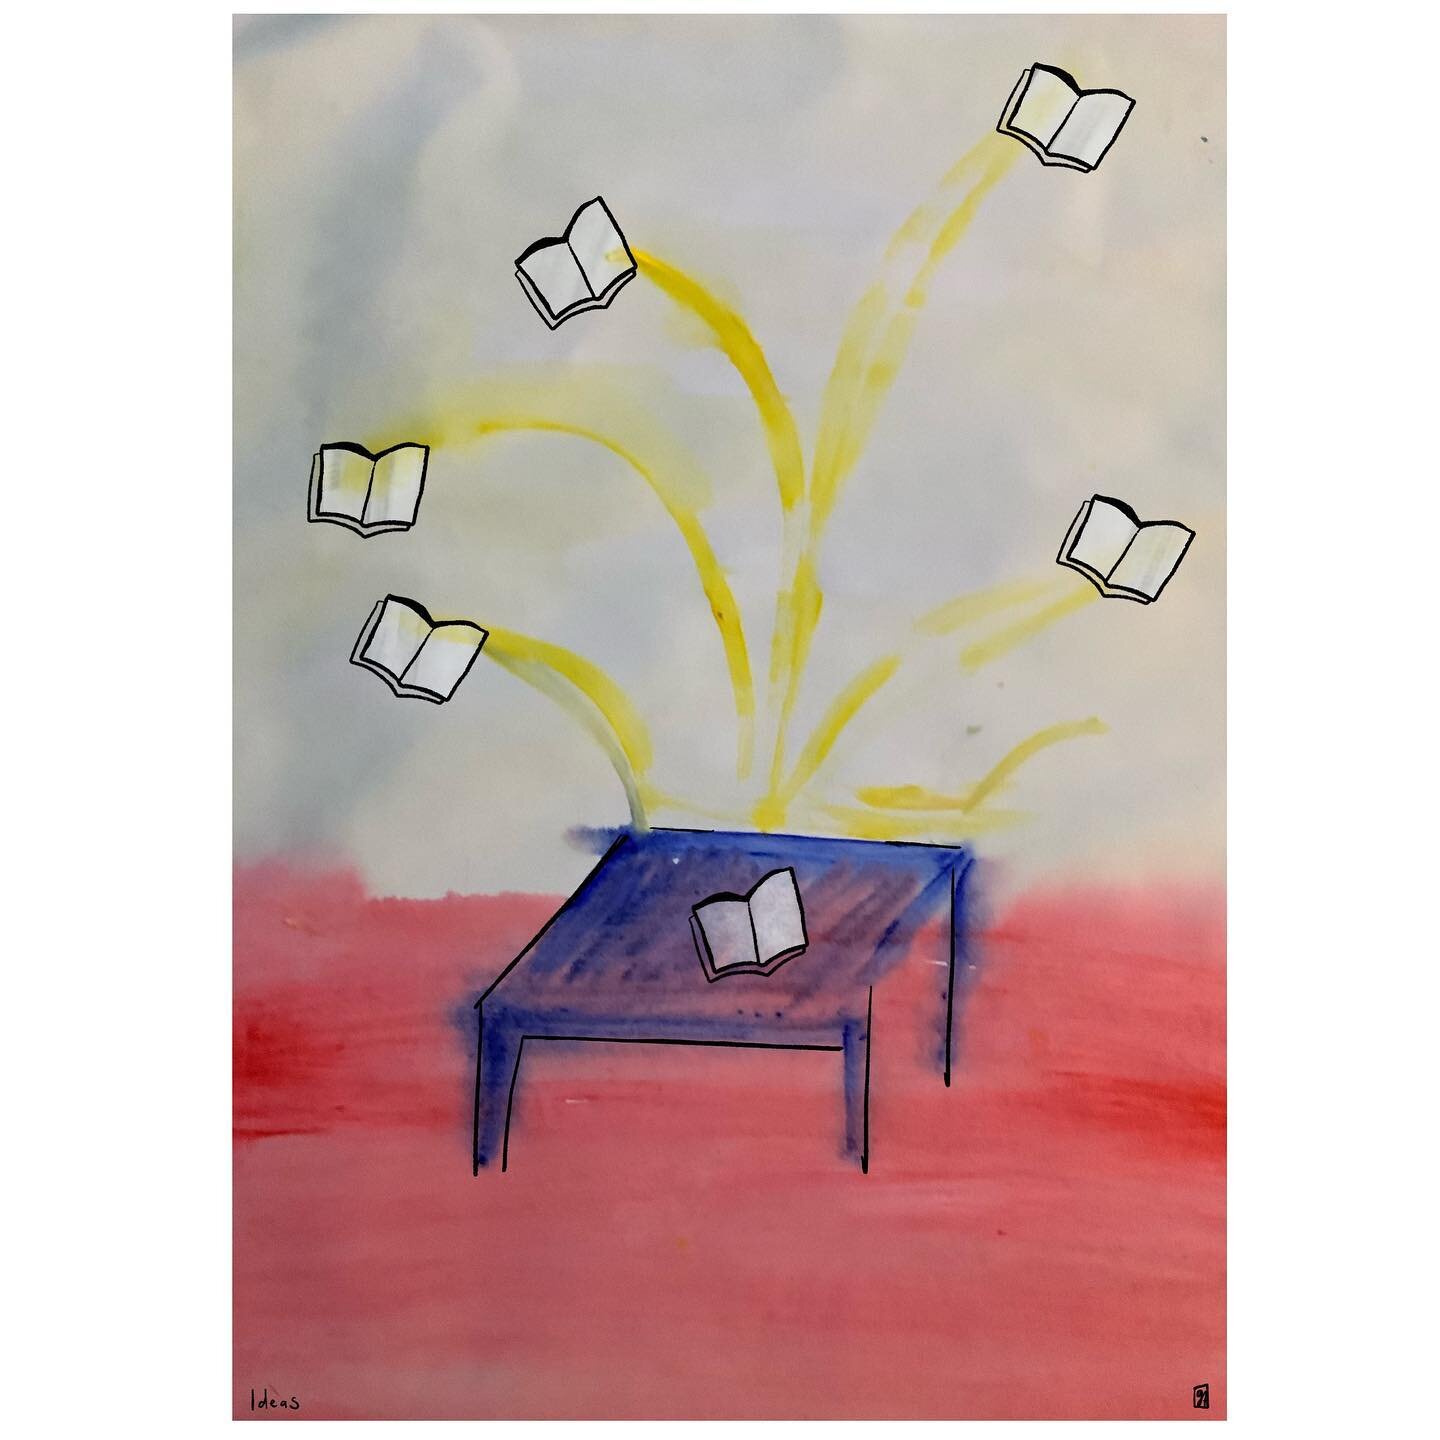 I love a #library though my attention span for reading has gone more towards audio books x 

#illustration #paint #art #flyingbooks #bookdrawing #projectgala #deskart